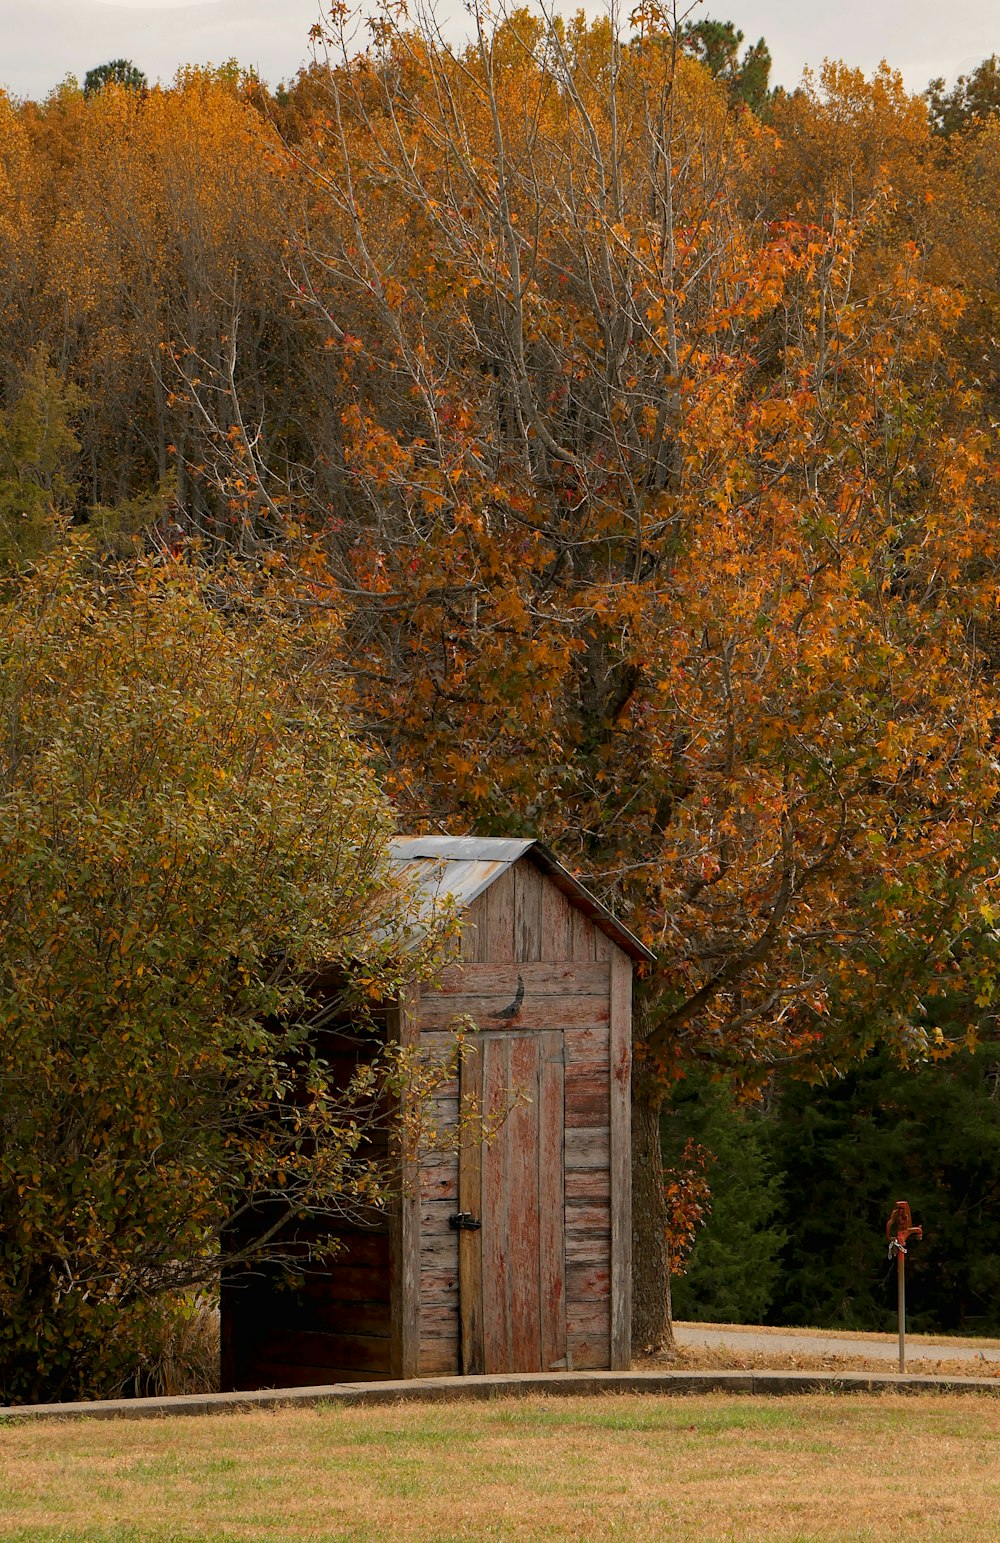 a outhouse in the middle of a field with trees in the background